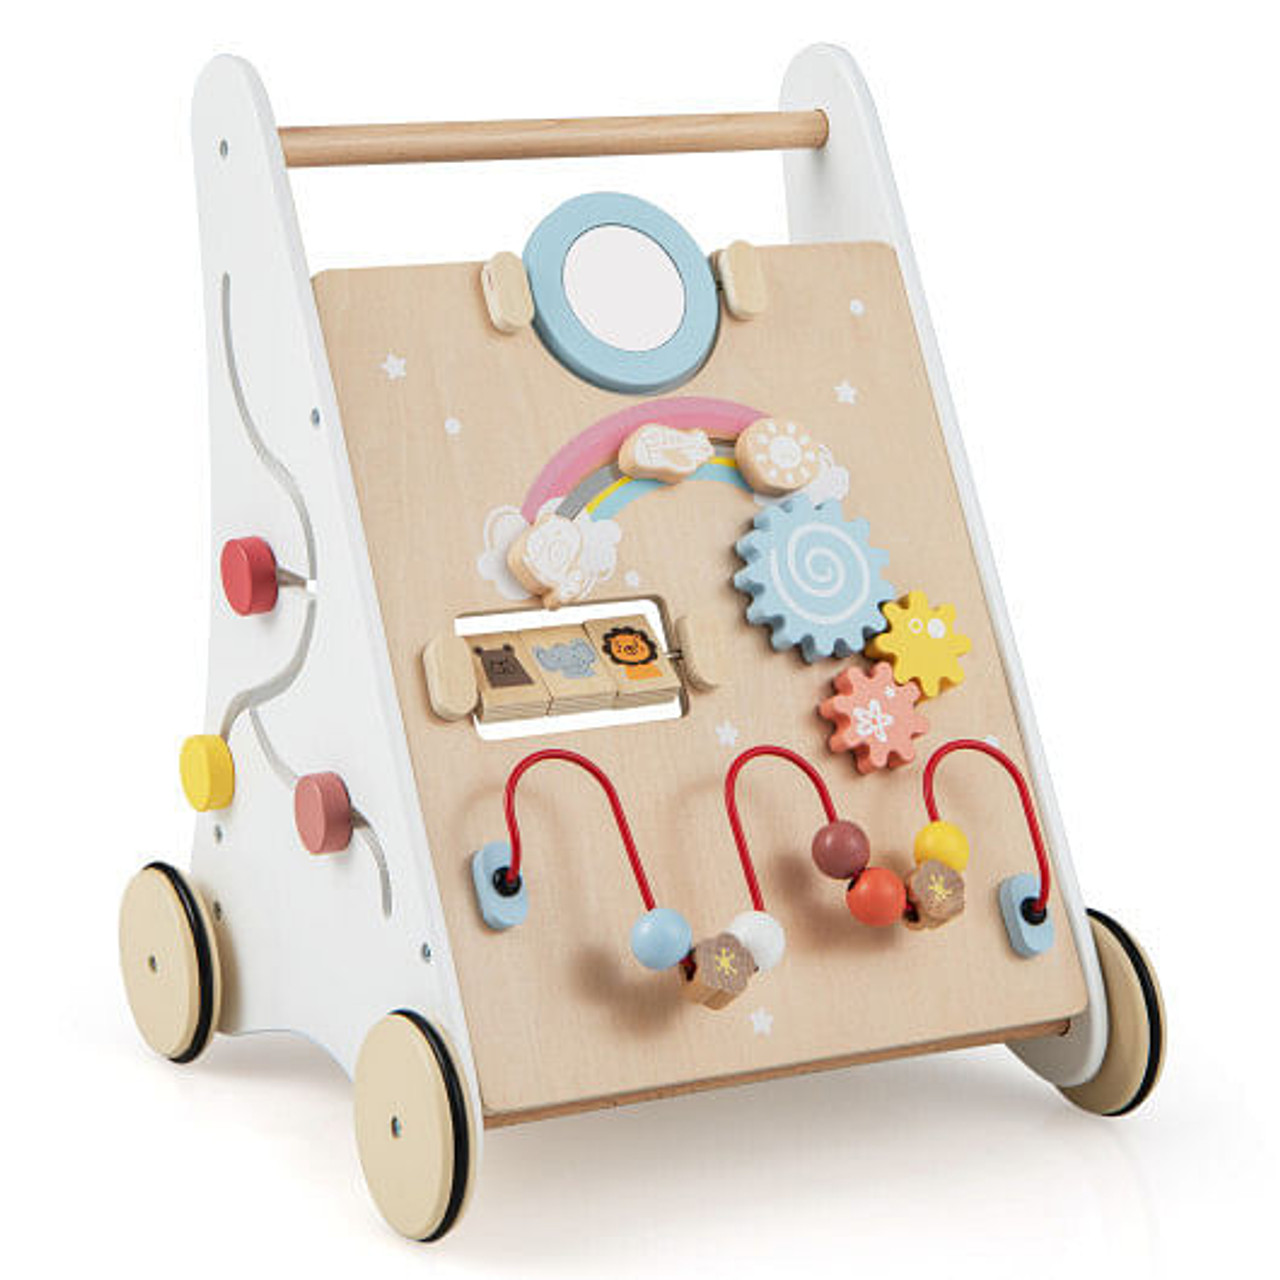 Wooden Baby Walker with Multiple Activities Center for Over 1 Year Old-White